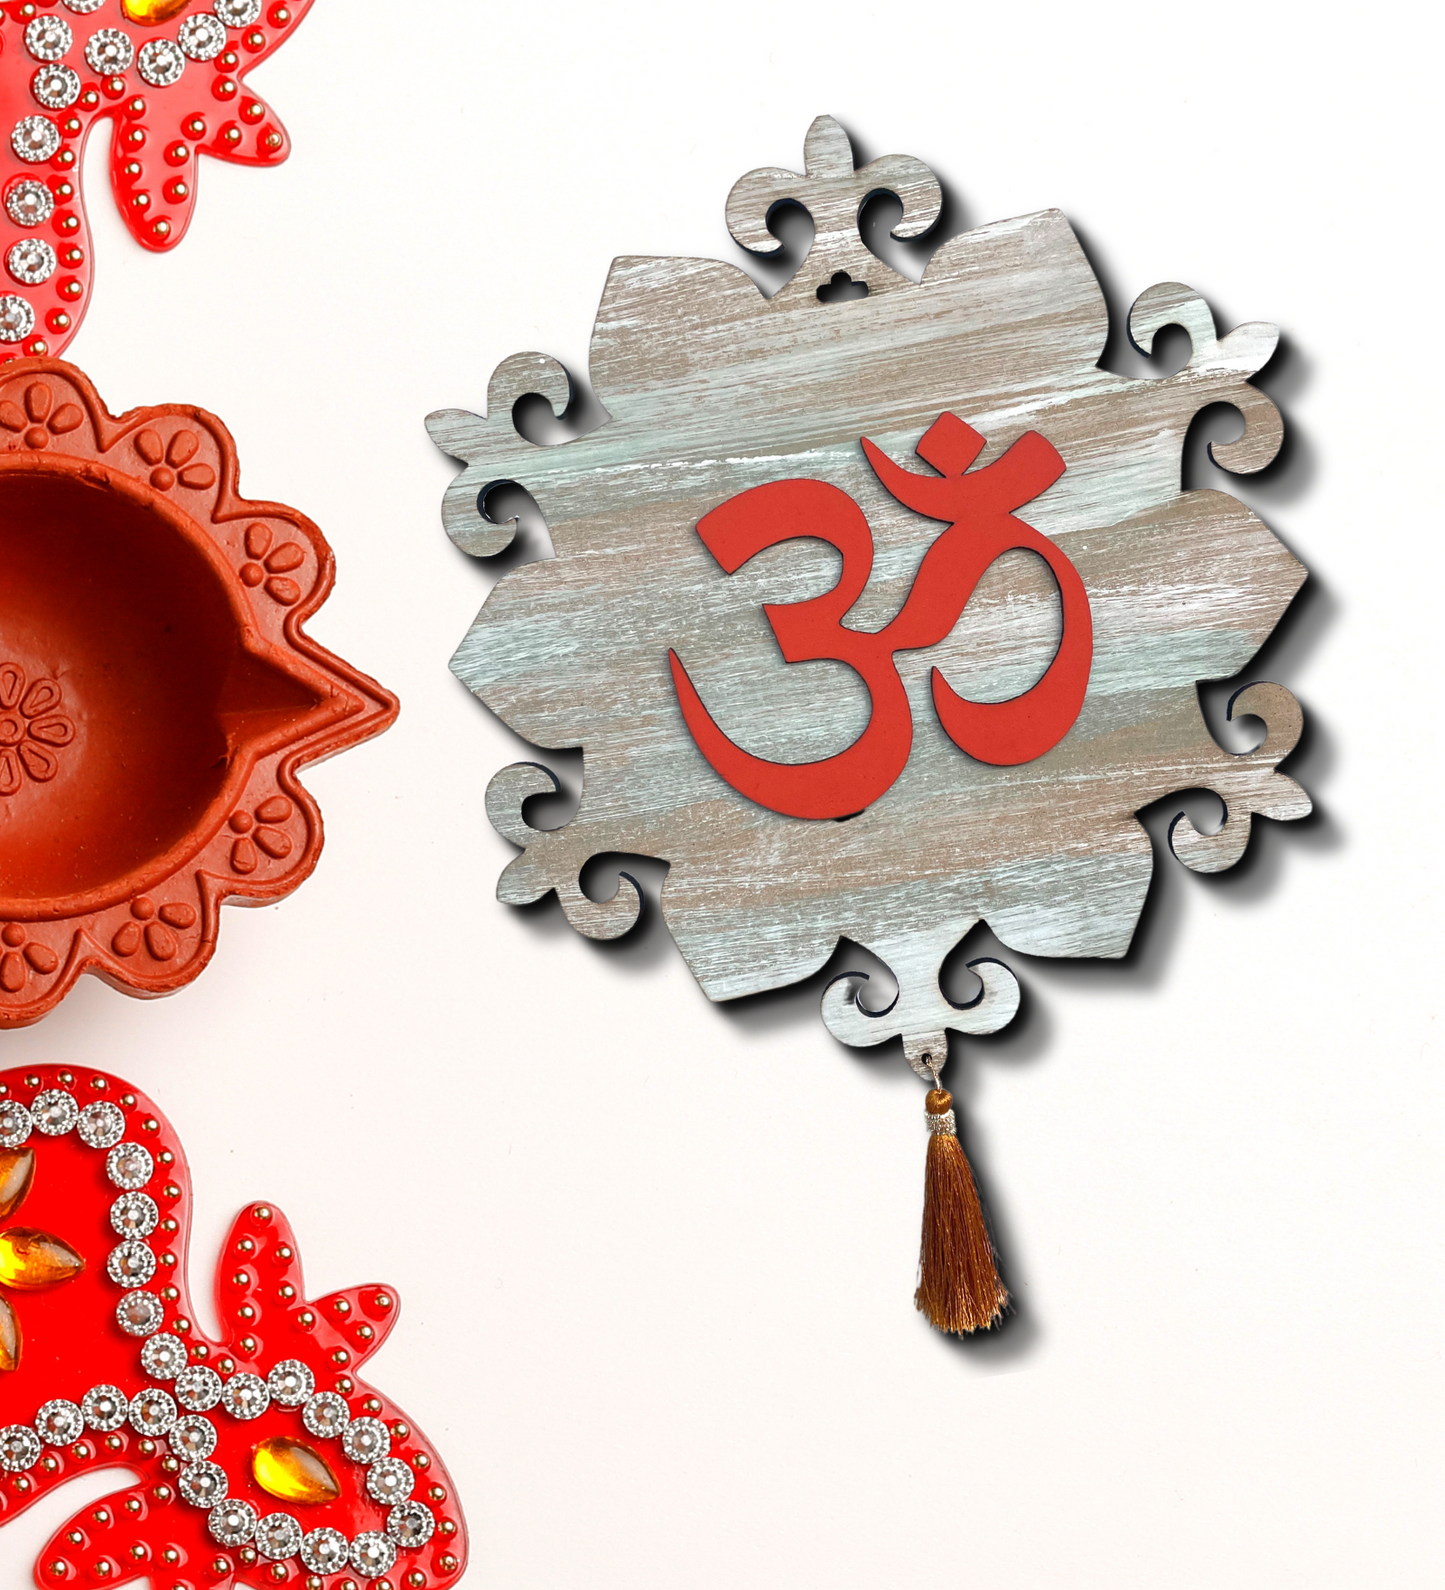 OM Wooden Wall Art with Rustic Base and Tassel